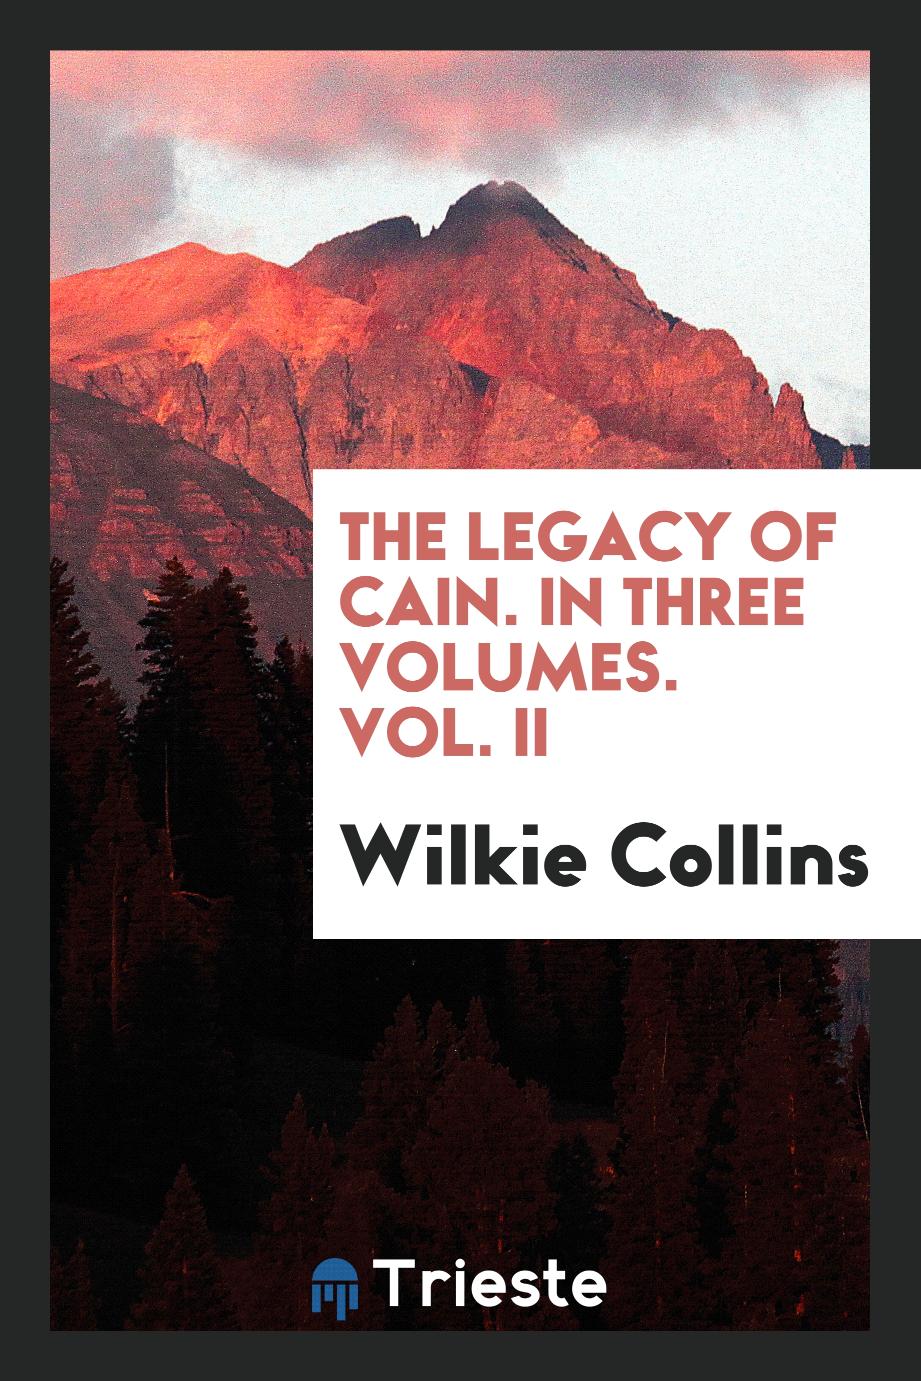 The legacy of Cain. In three volumes. Vol. II